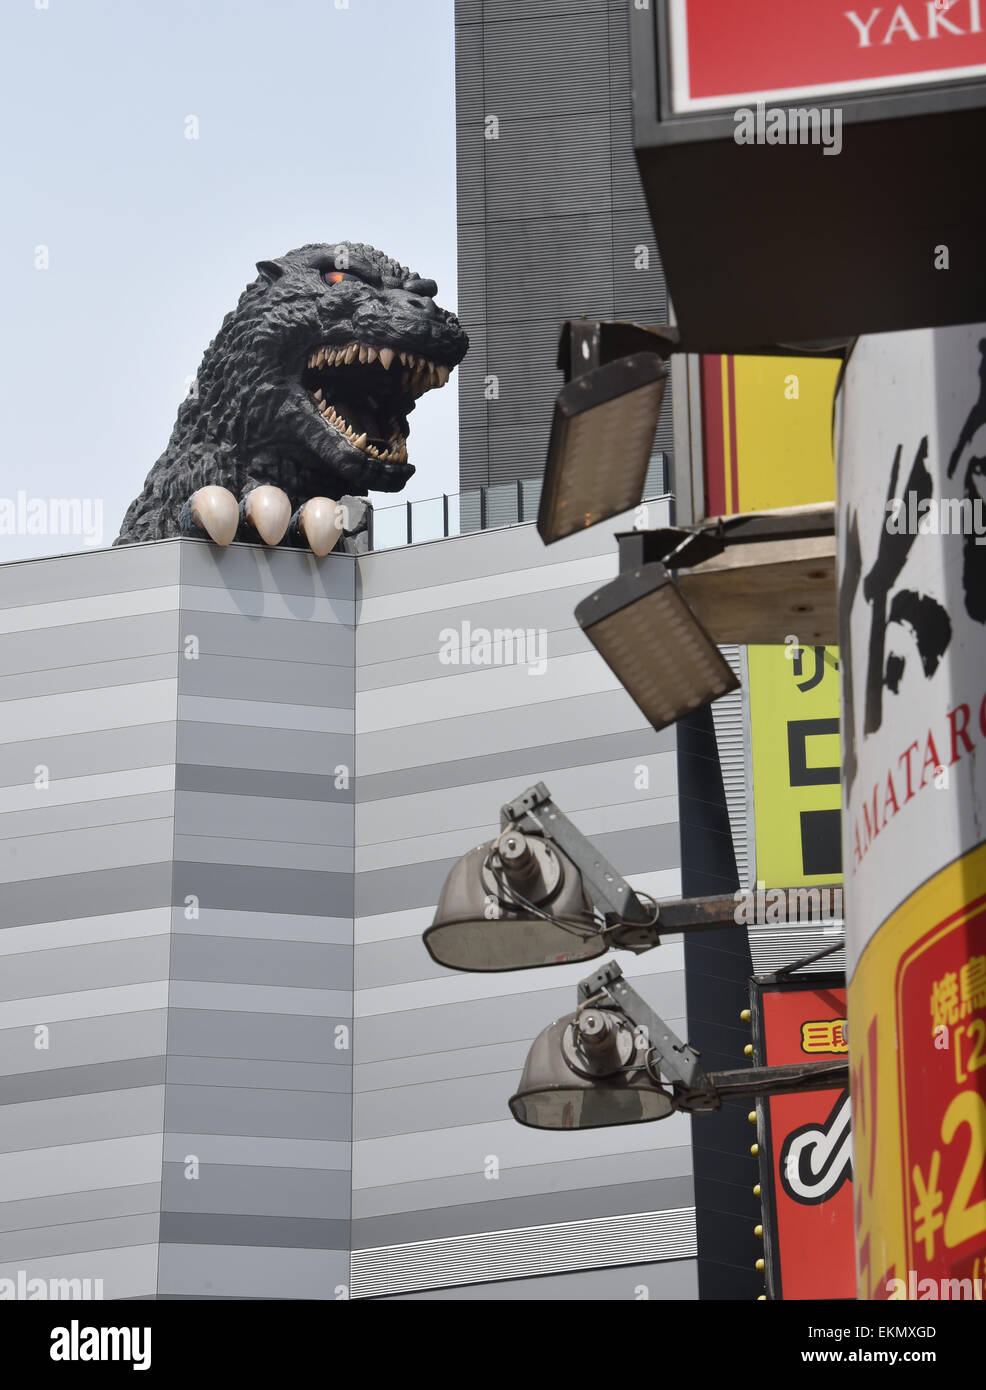 Tokyo, Japan. 12th Apr, 2015. Japan's fire-breathing, building-stomping Godzilla returns to the nation's capital on Sunday, April 12, 2015. The life-size head of the world-renowned fictional monster was unveiled atop a hotel balcony some 52 meters above ground in a new commercial complex in Tokyo's Shinjuku district. © Natsuki Sakai/AFLO/Alamy Live News Stock Photo